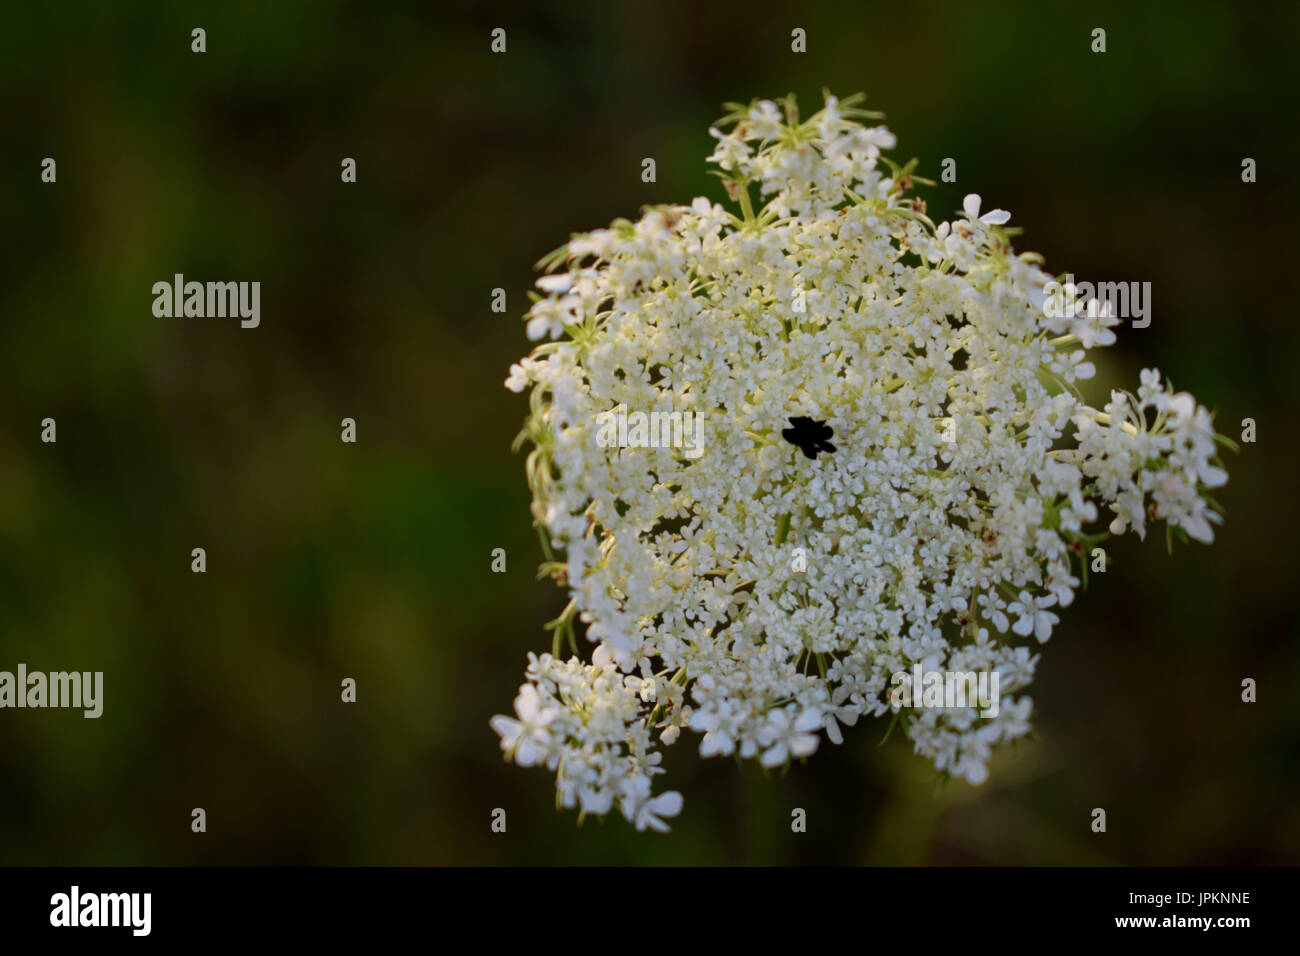 Flower of the plant Daucus carota, or Queen Anne's lace, also known as Wild carrot Stock Photo